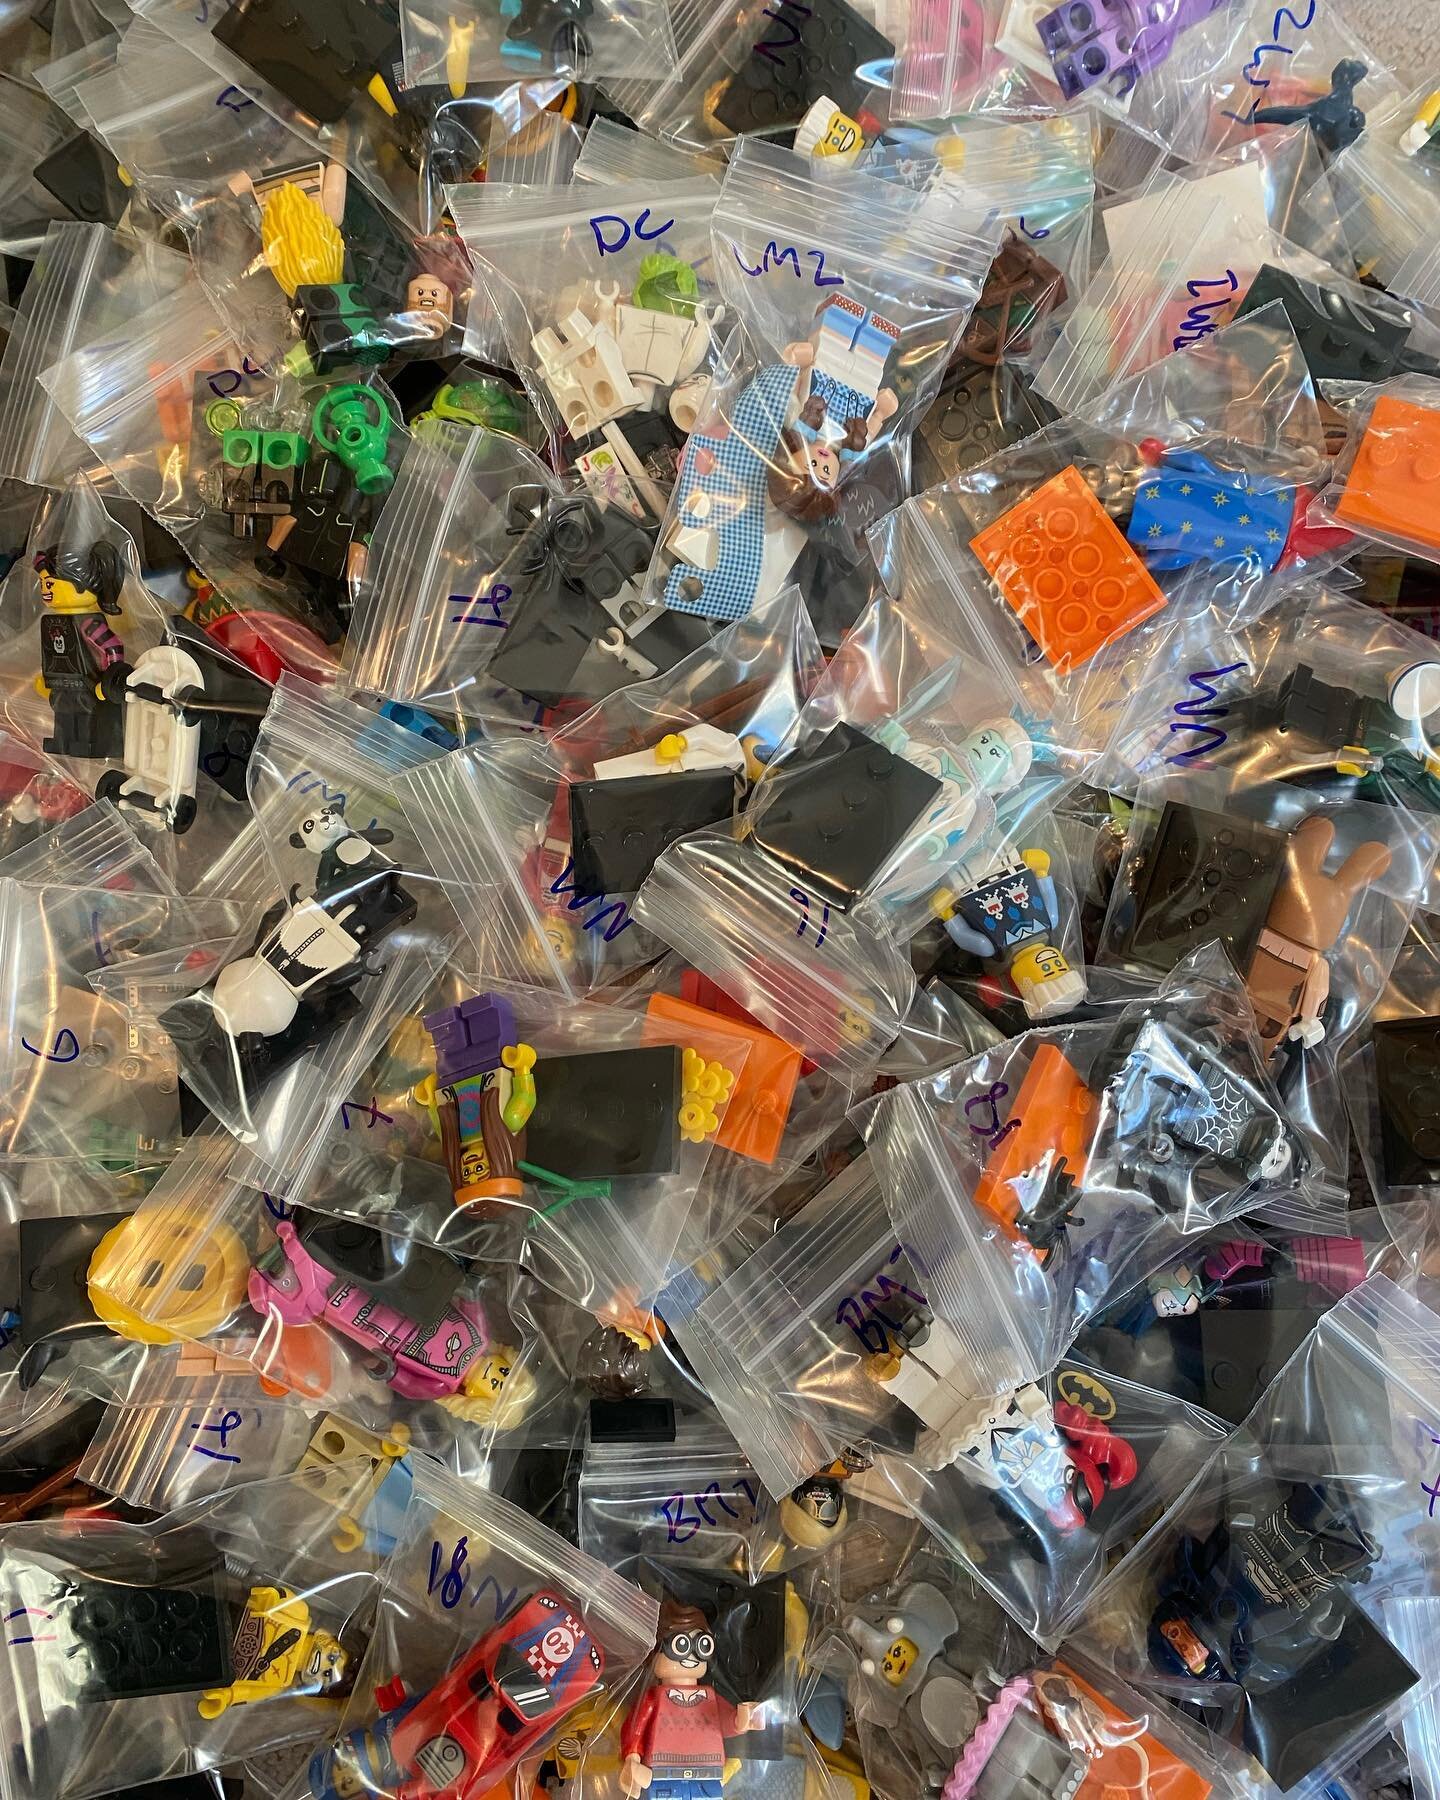 Busy morning sorting minifigures for the Bristol Brick Show next weekend. Still mountains to sort! #lego #bricklink #bricklinkstore #bricklinkseller #bricklinkselleruk #brickowl #brickowlseller #brickowstore #legoshow #legominifigures#legominifigures